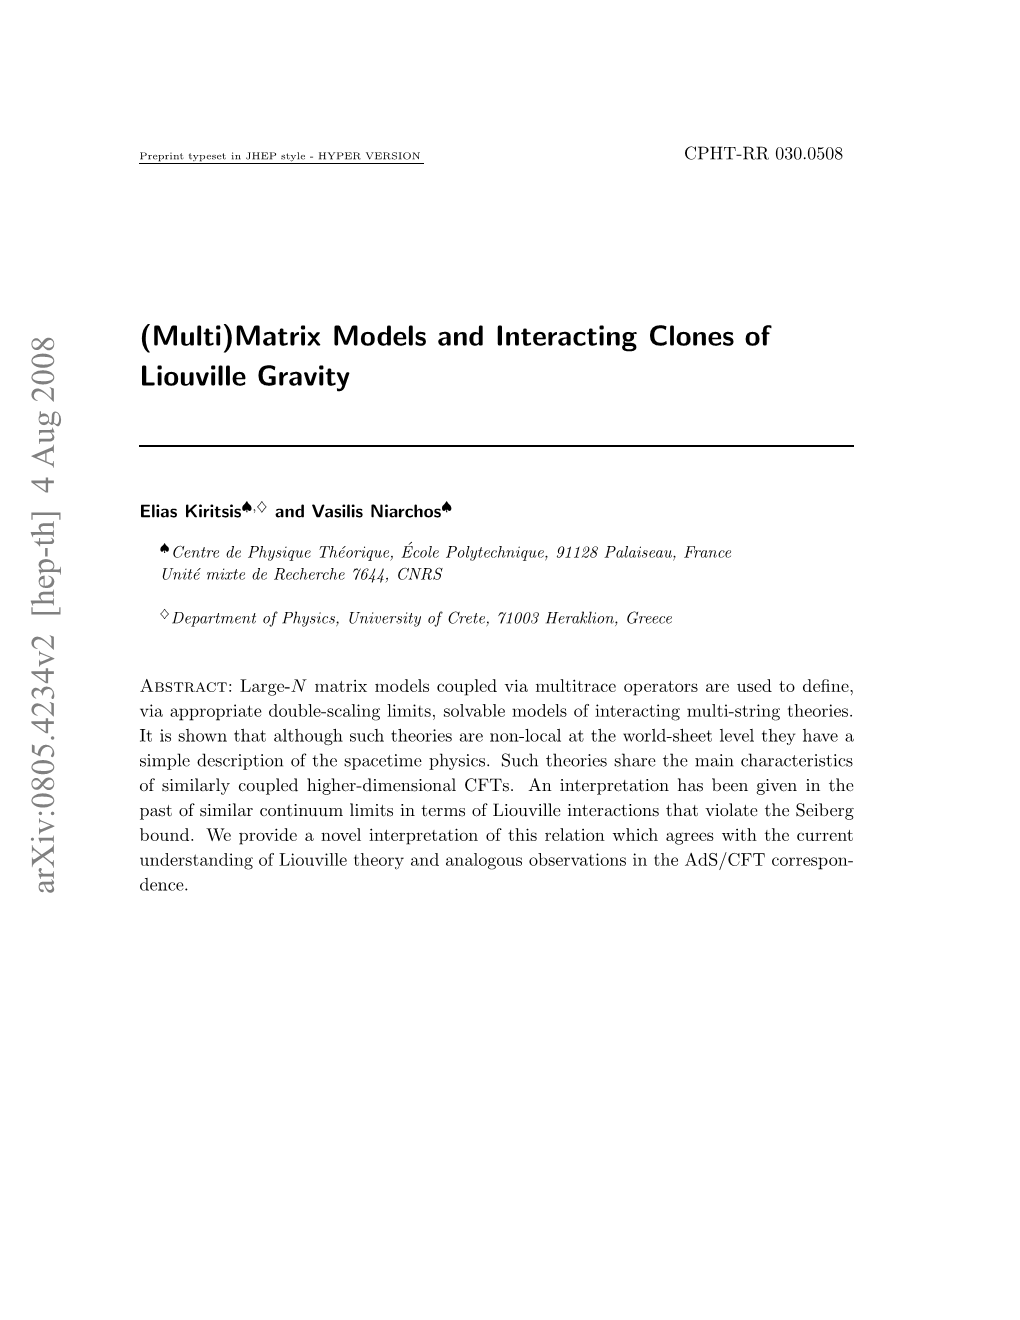 (Multi) Matrix Models and Interacting Clones of Liouville Gravity